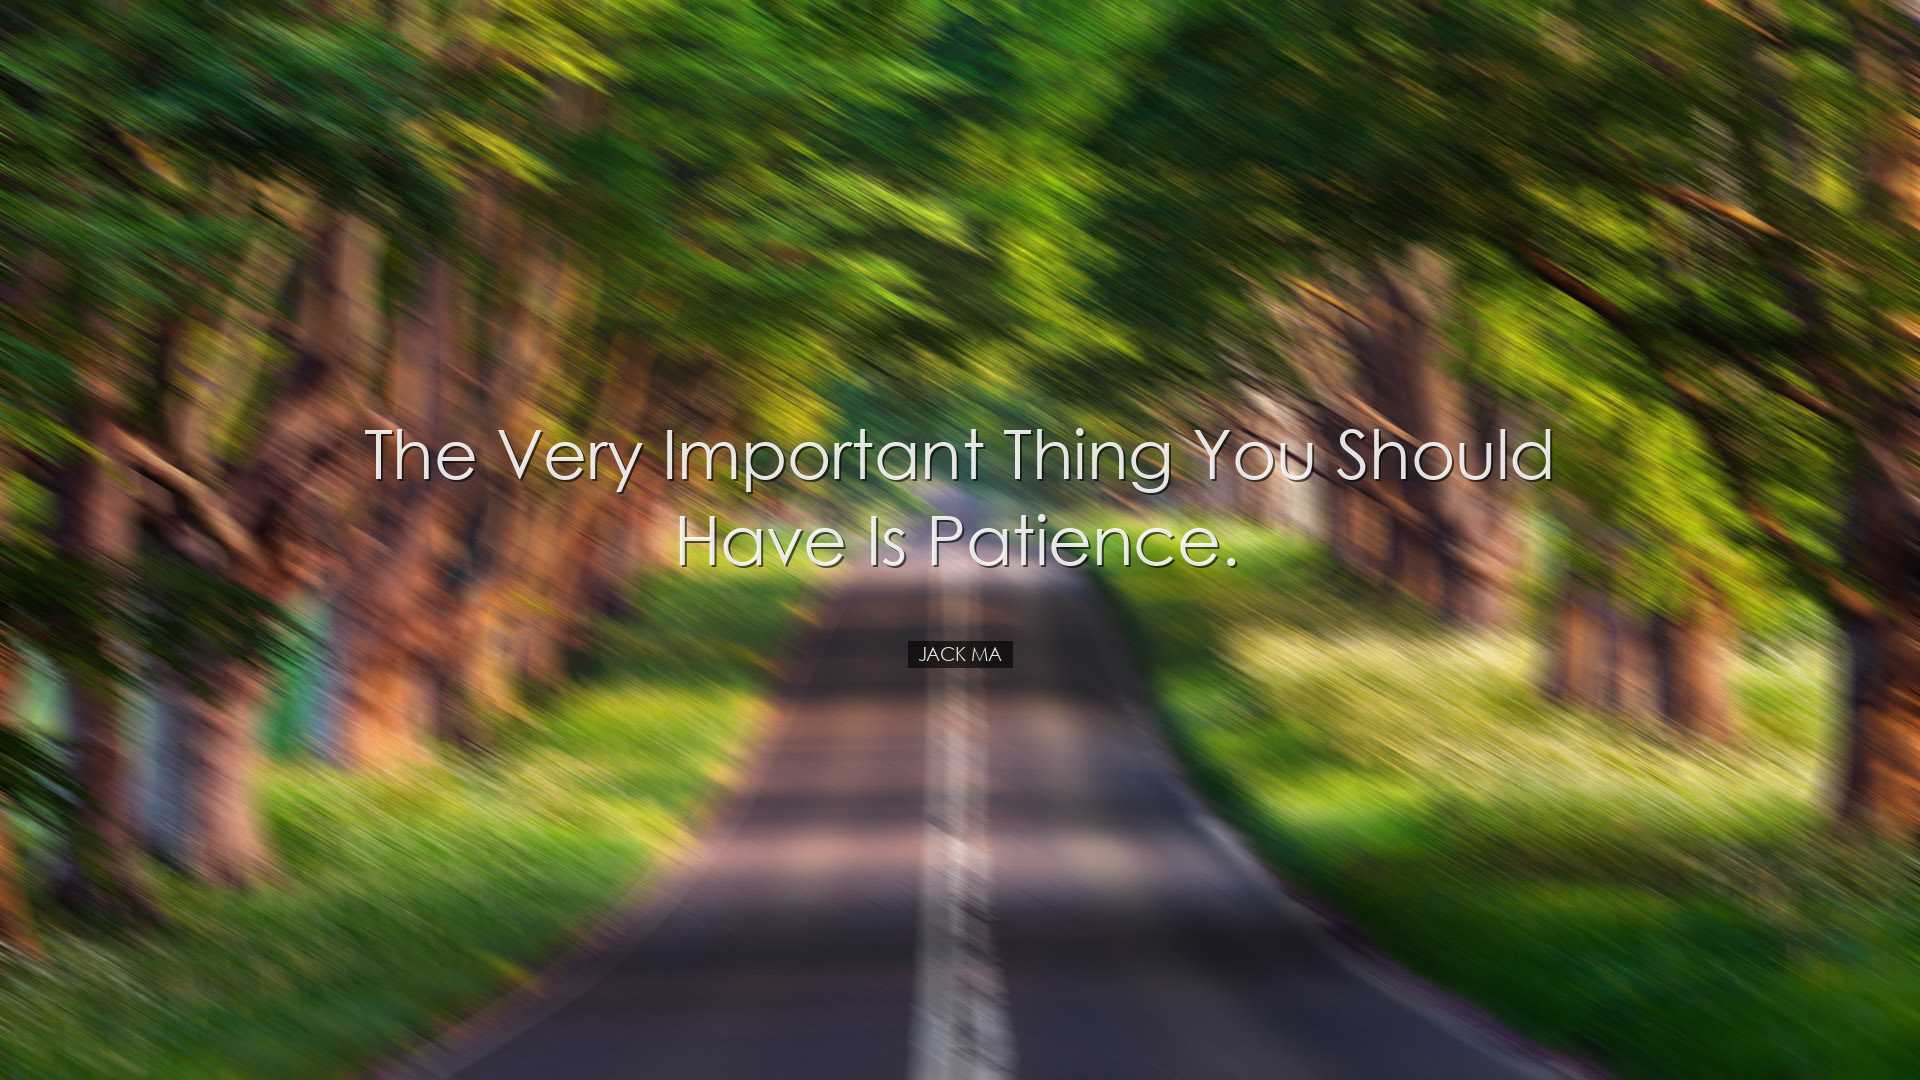 The very important thing you should have is patience. - Jack Ma